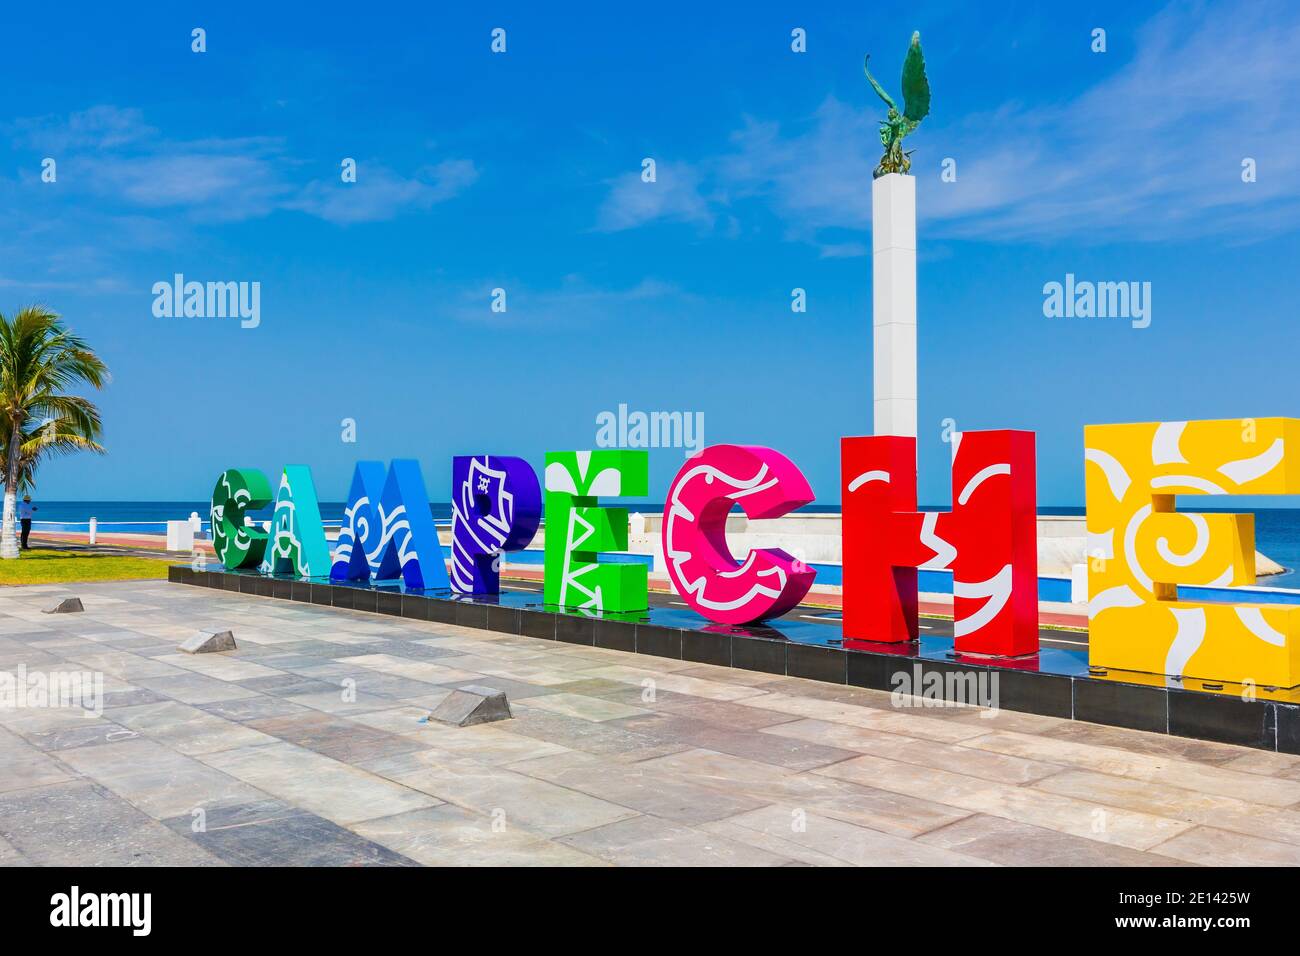 Campeche, Mexico. April 23, 2019: Campeche Seaside town sign. Stock Photo